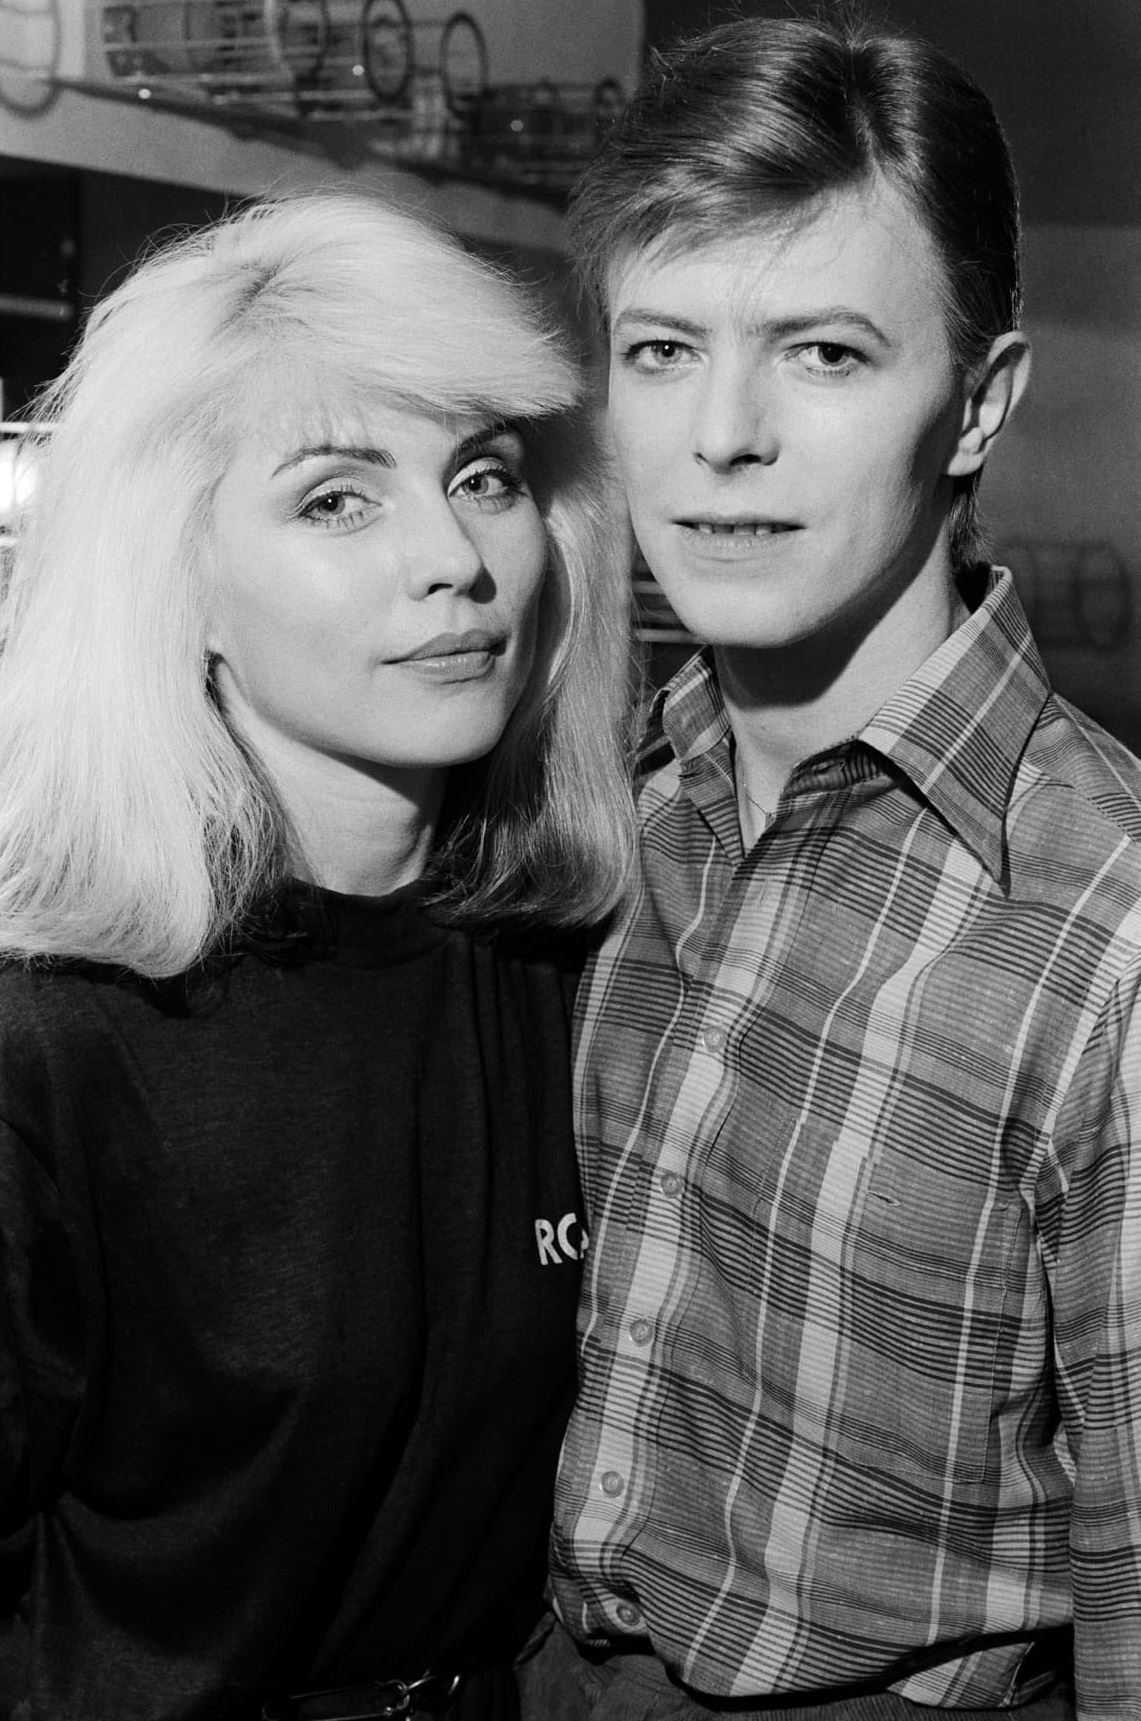 Debbie and David Bowie backstage during The Idiot tour, 1977